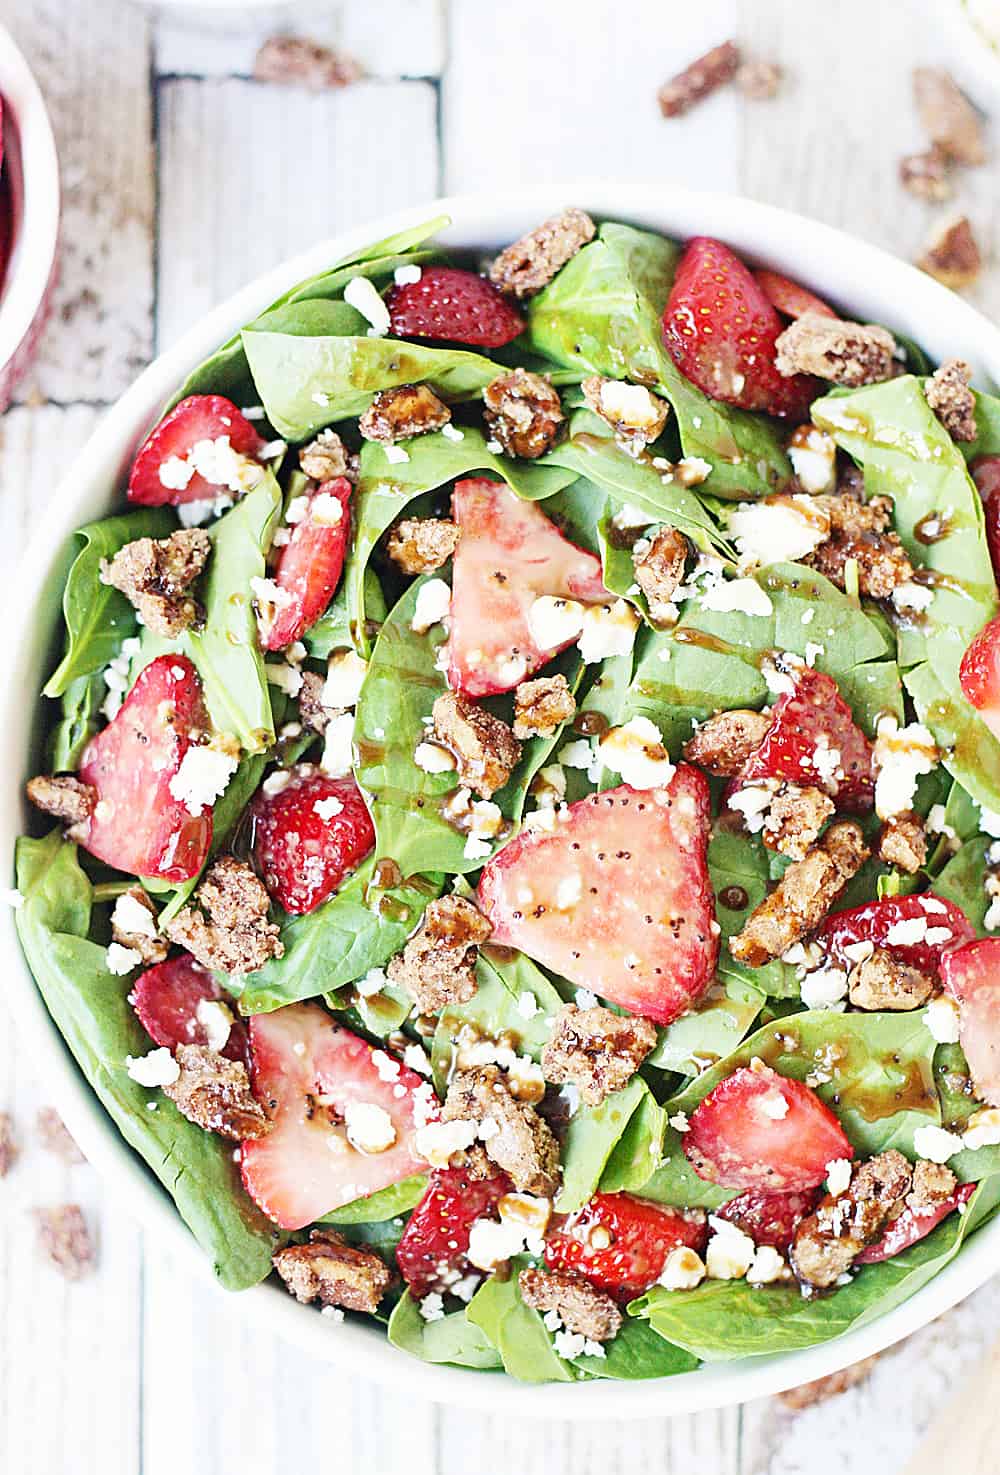 Strawberry Spinach Salad with Balsamic Poppy Seed Dressing -- This strawberry spinach salad boasts baby spinach, fresh strawberries, candied pecans, feta cheese, and the most amazing balsamic poppy seed dressing!